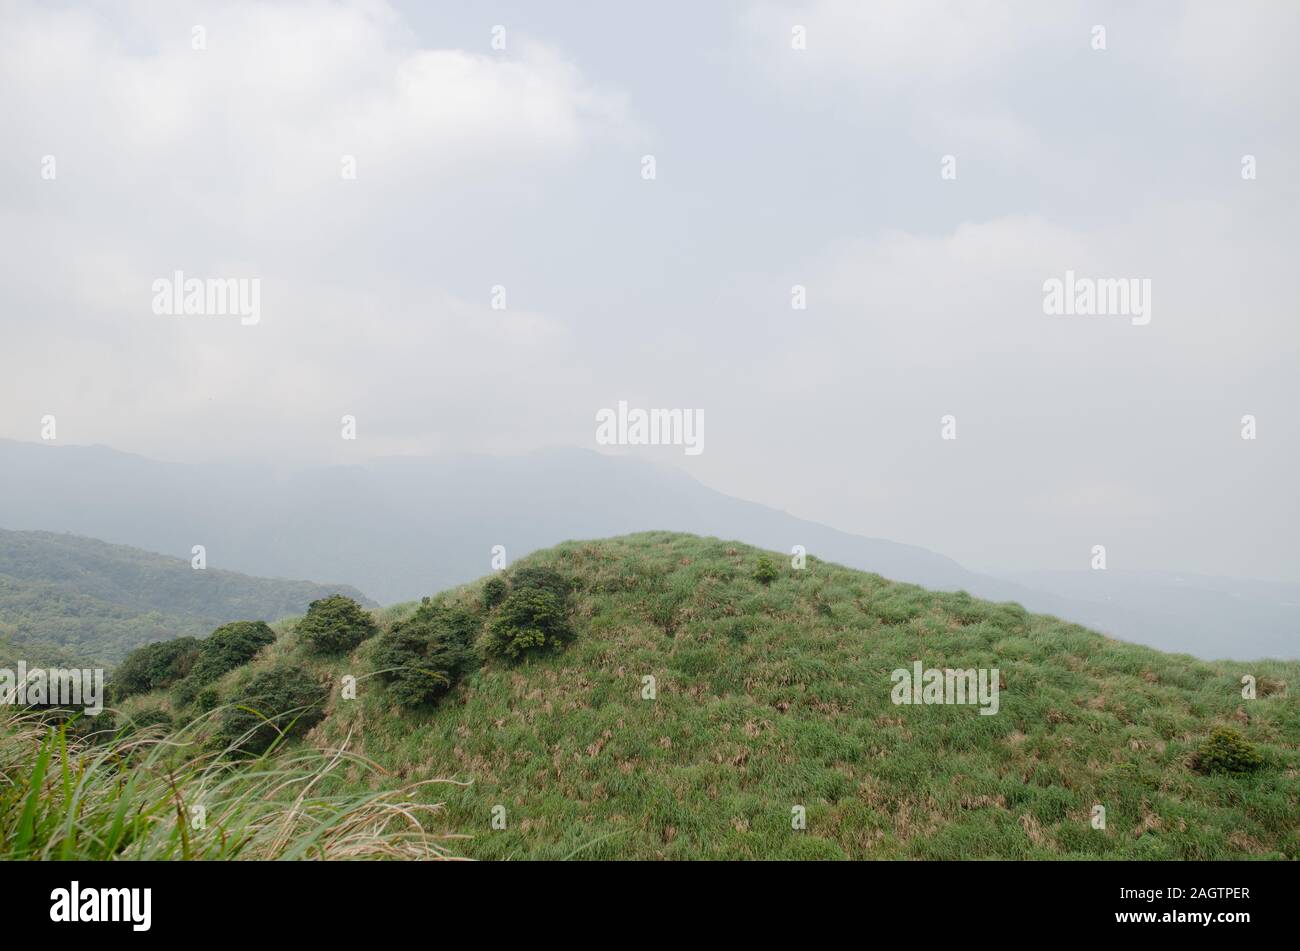 A hilly landscape with lush green grass at Yangmingshan National Park in Taiwan, March 2019 Stock Photo